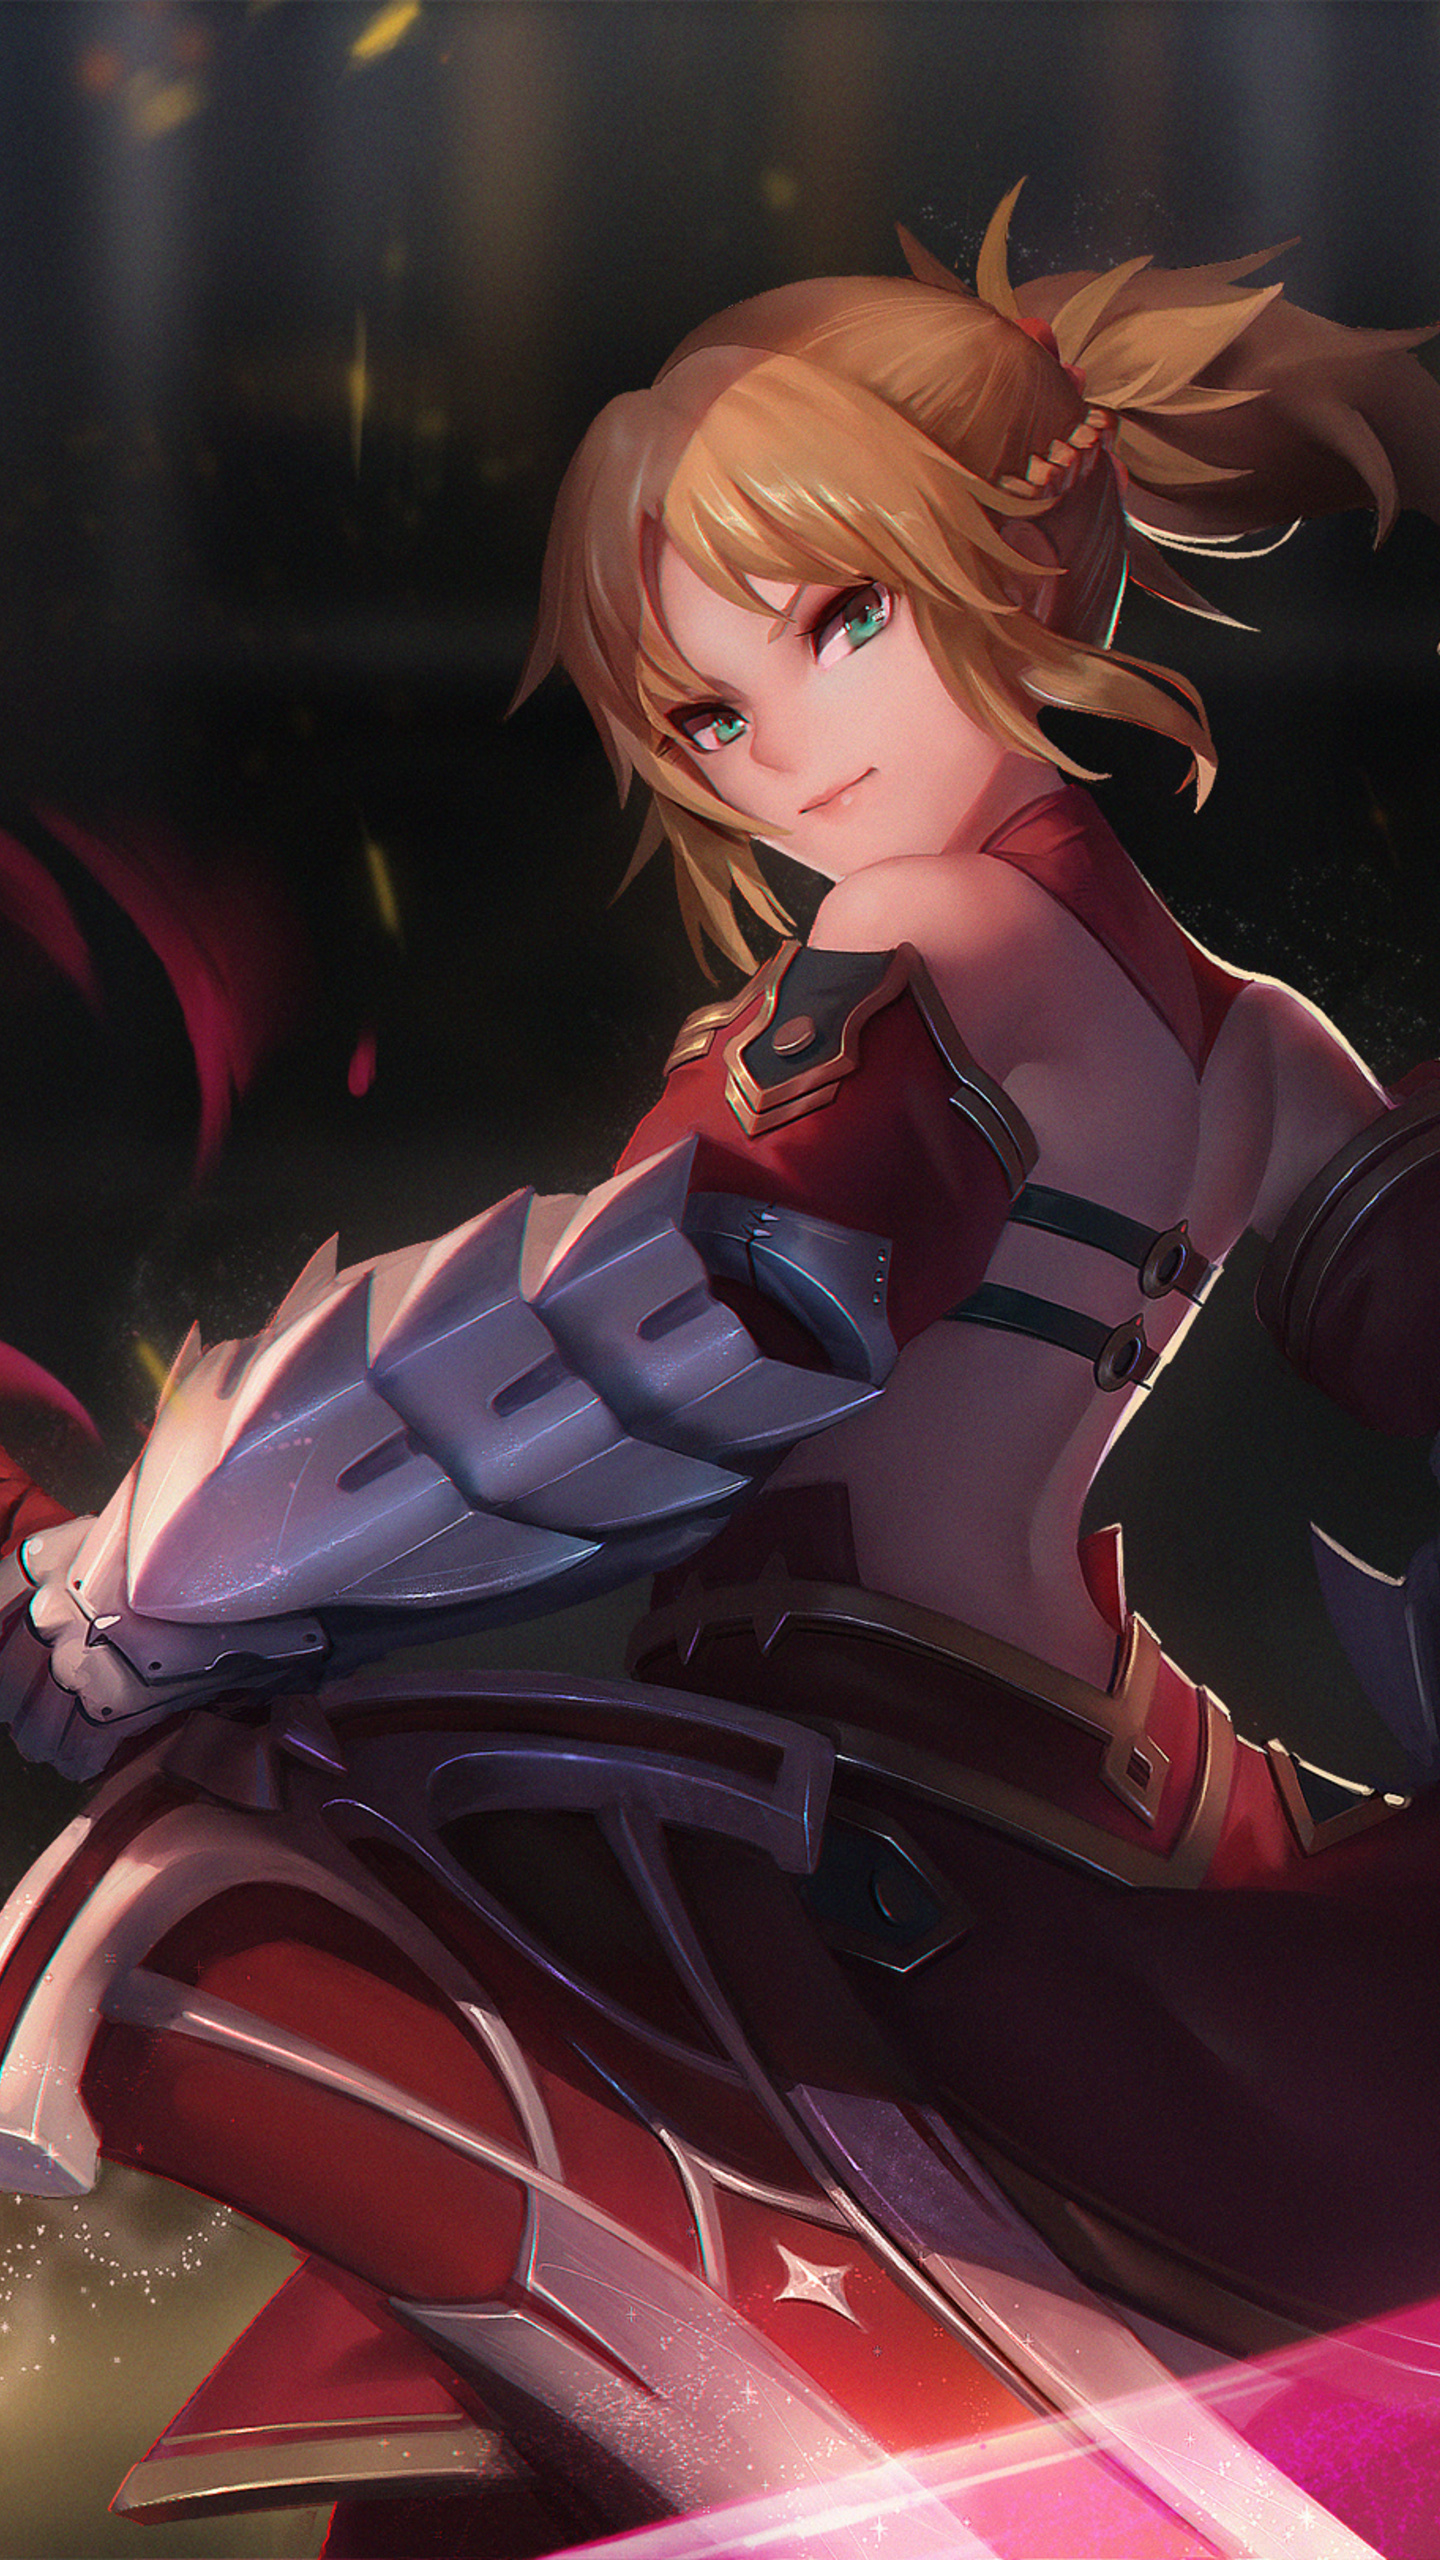 1440x2560 Saber Of Red Fate Grand Order Samsung Galaxy S6,S7 ,Google ...